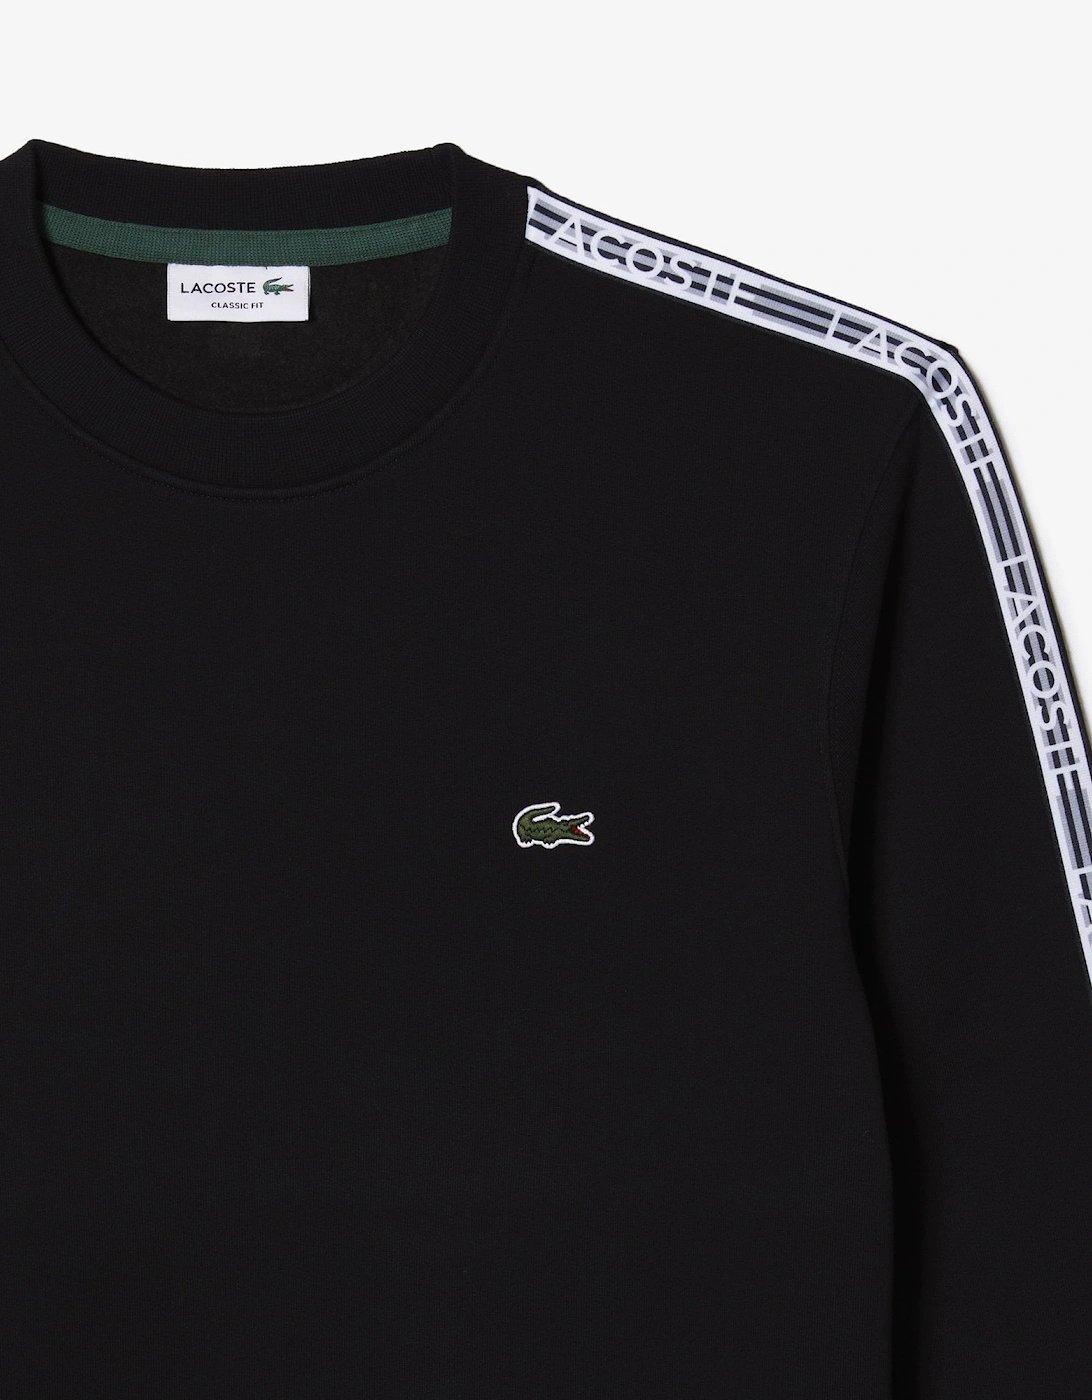 Men's Black Classic Fit Crew Neck Sweatshirt With Taping.